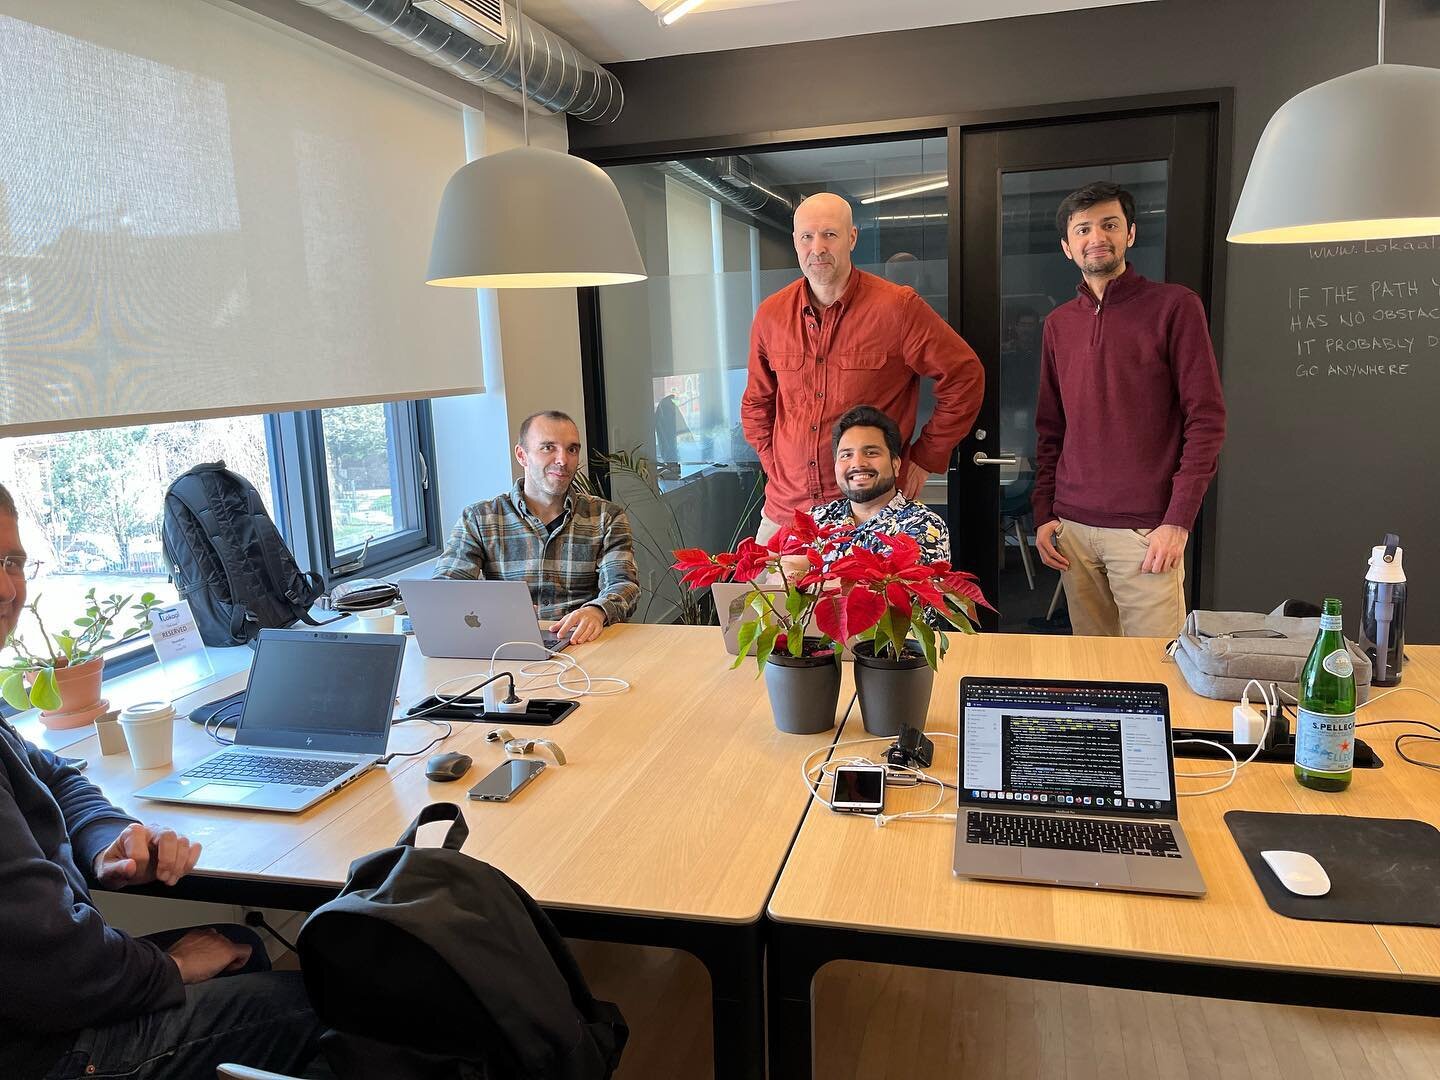 The Toronto team from French tech company La Francais des Jeux Societe coming together for their weekly work sprint and collaboration at Lokaal. Nothing beats being together to innovate and build strong ties with coworkers. 
.
.
.
#coworking #coworki